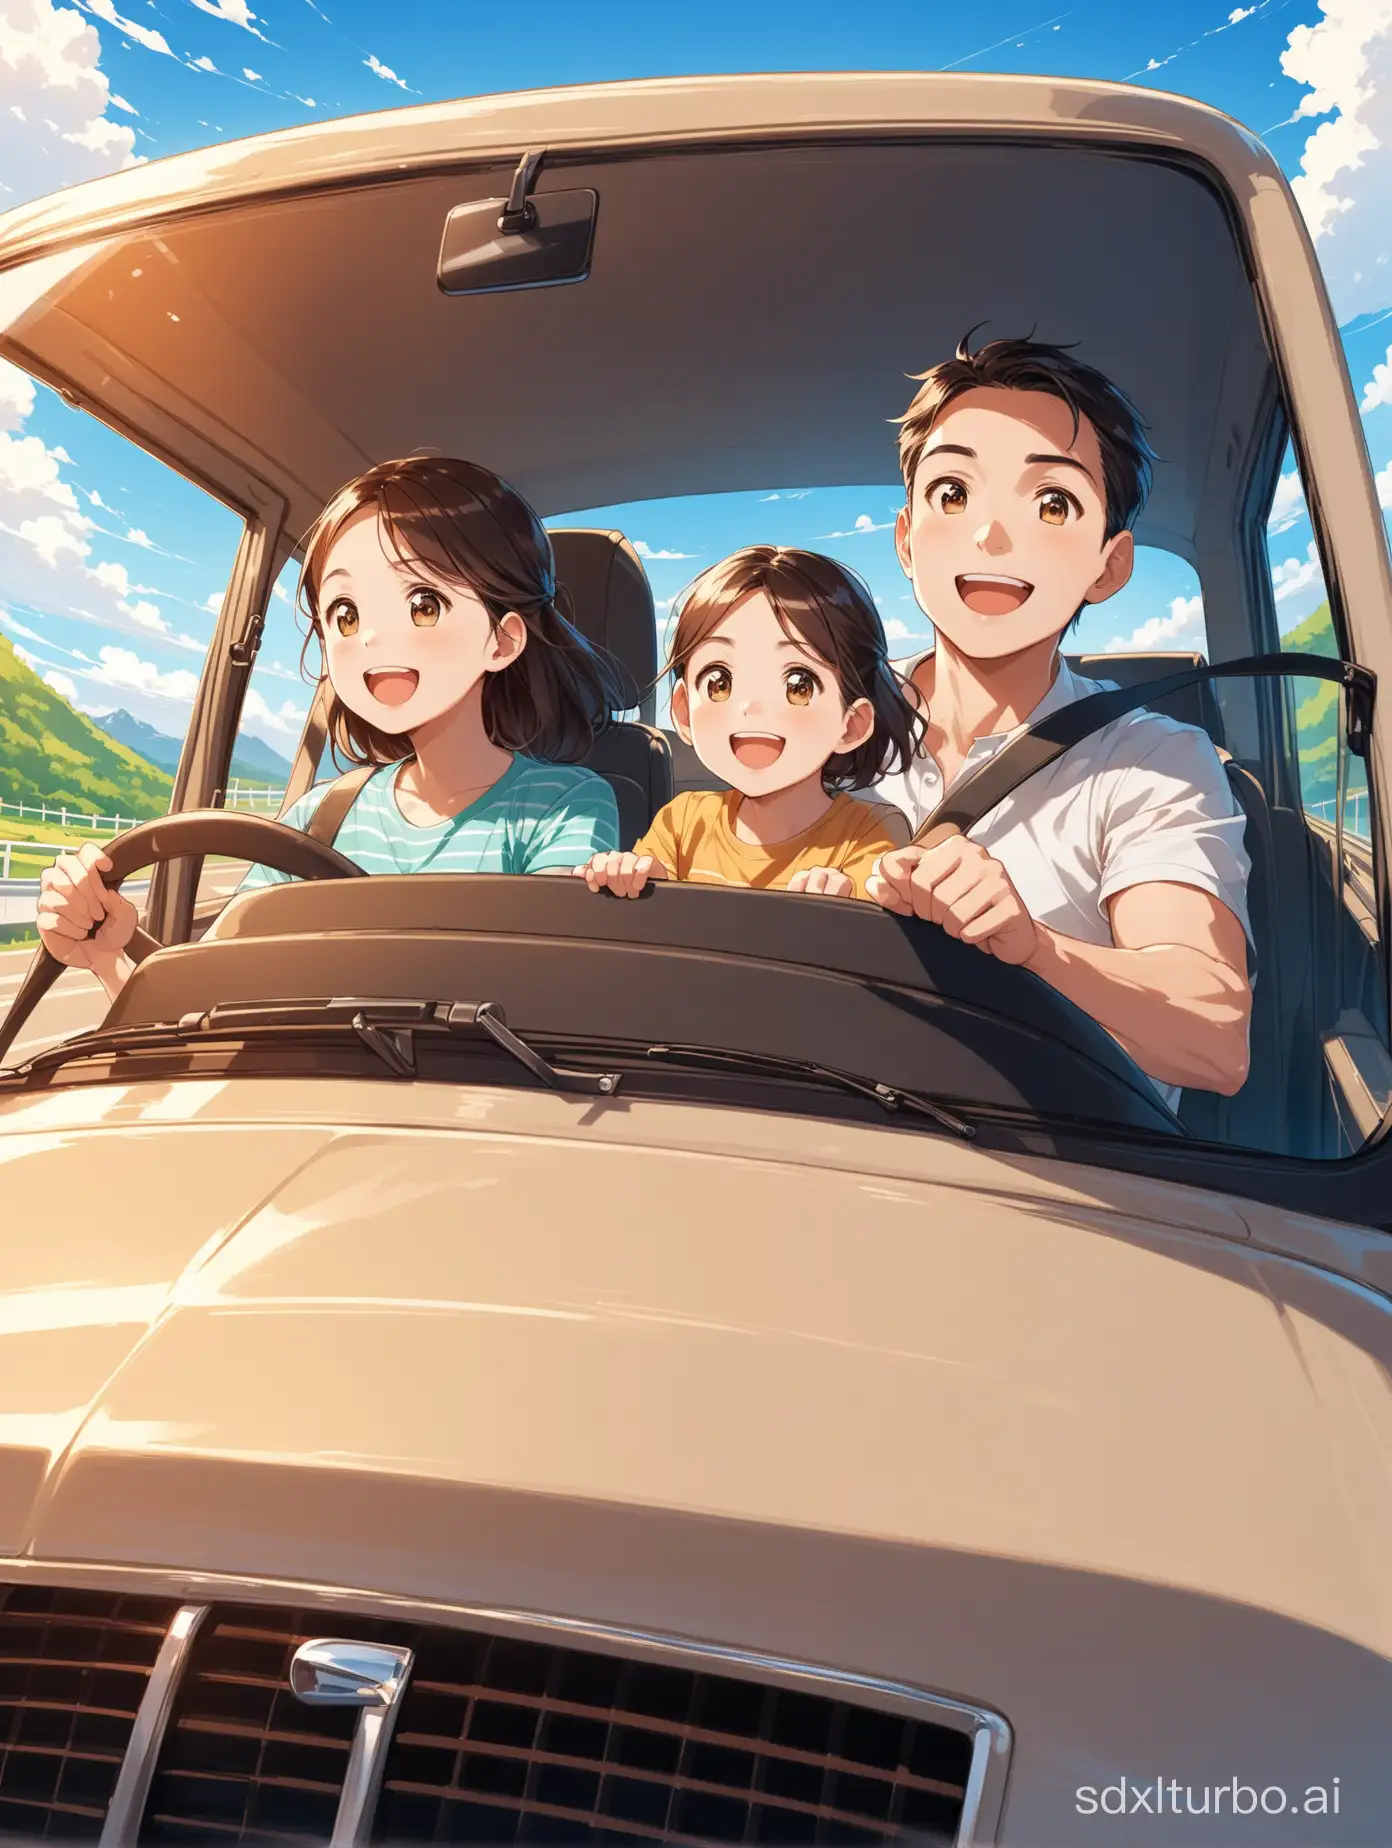 A family drives to go on a trip